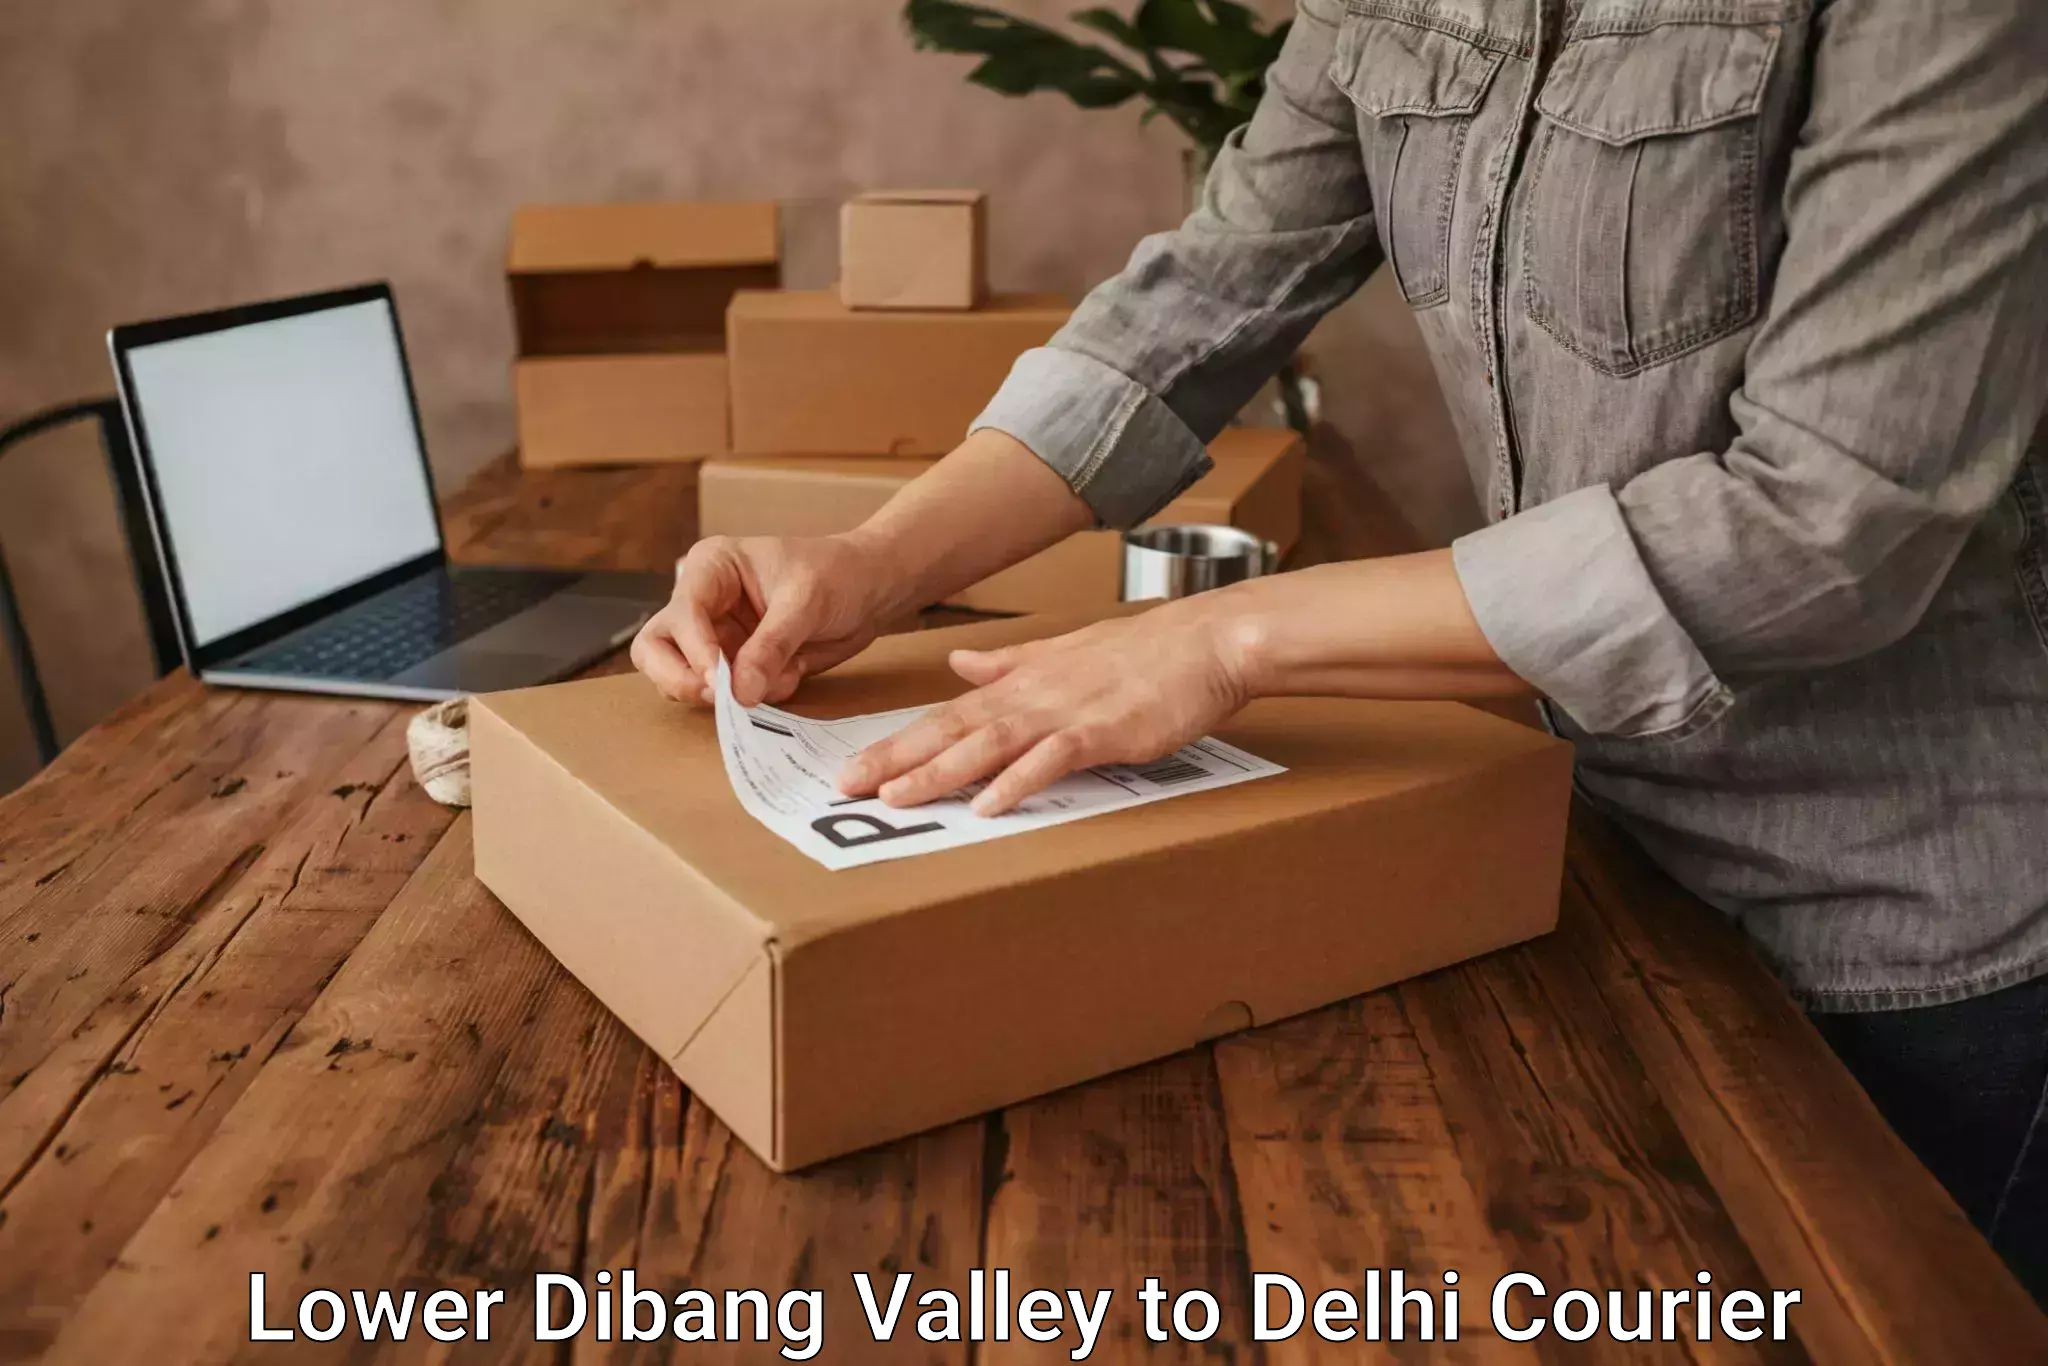 Doorstep delivery service Lower Dibang Valley to Ashok Vihar